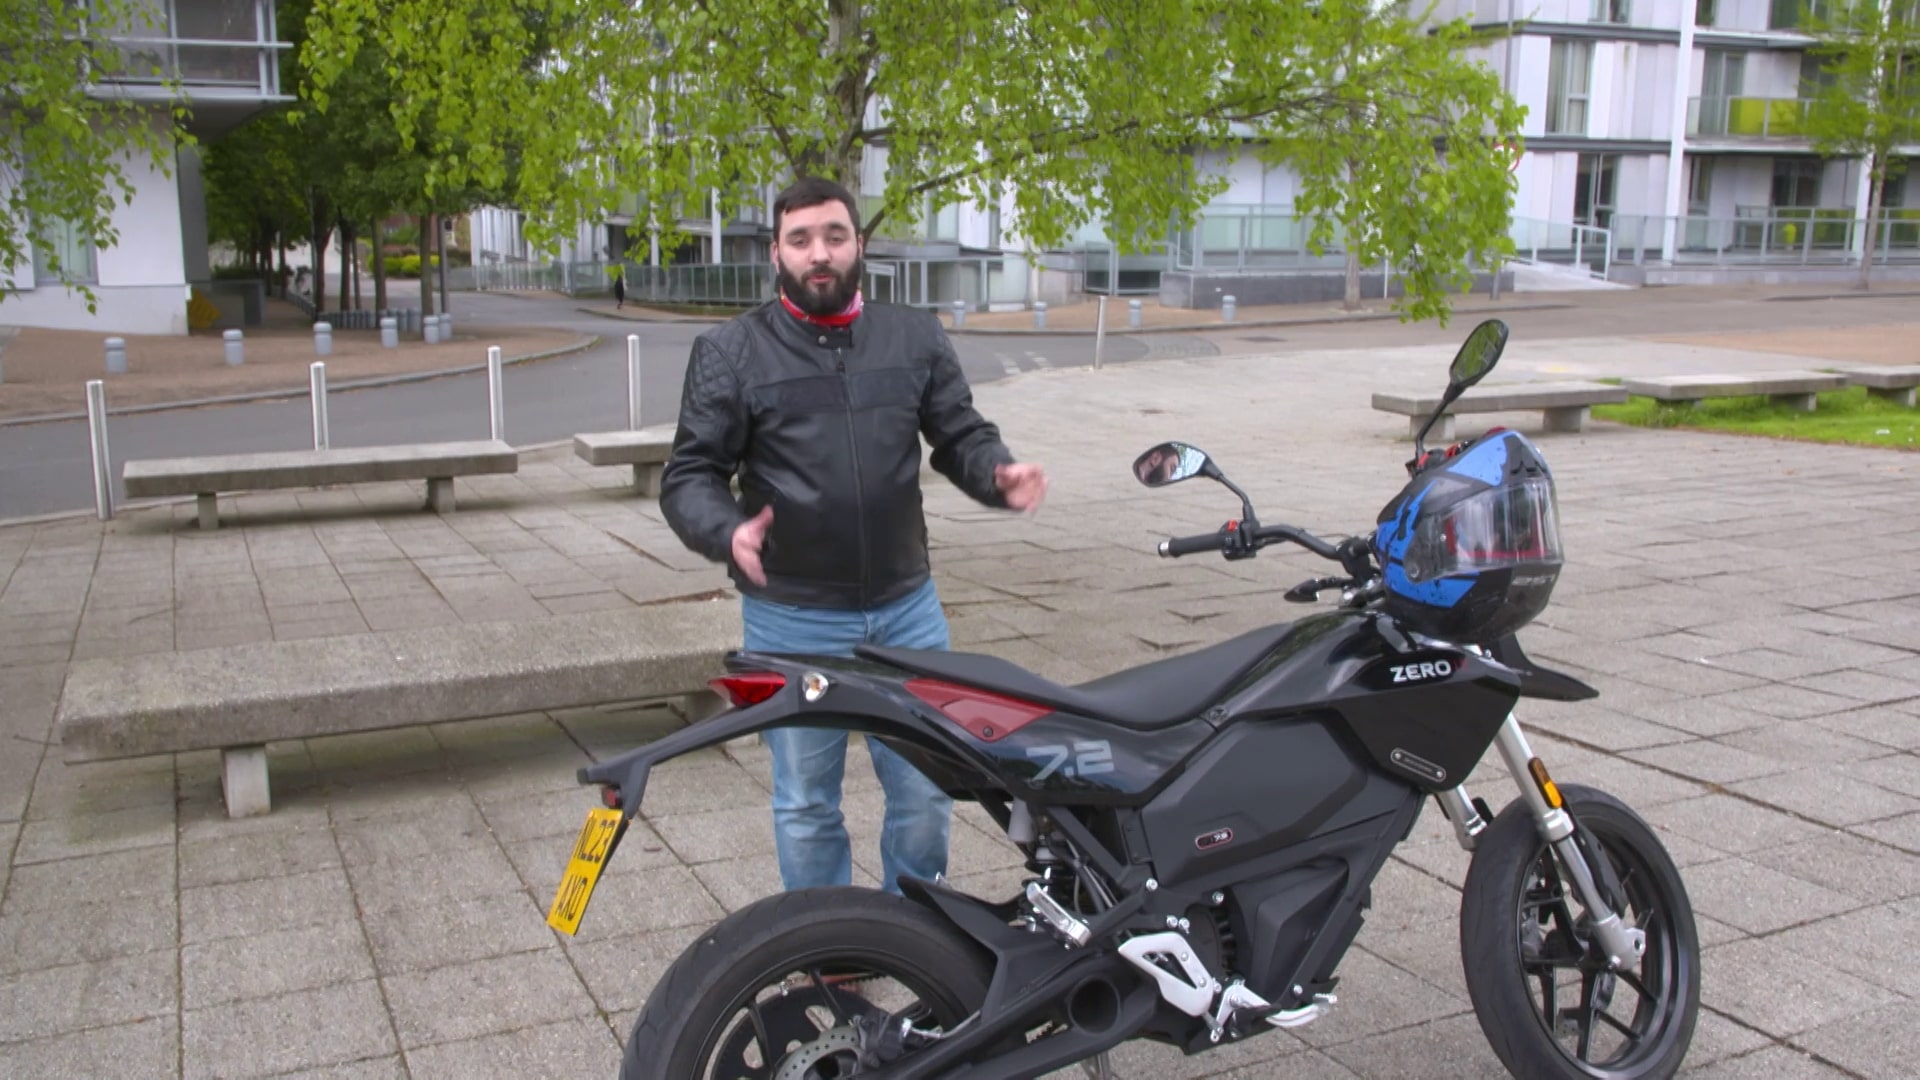 Sun Motors' Jacob Jaffa took one out for a test ride